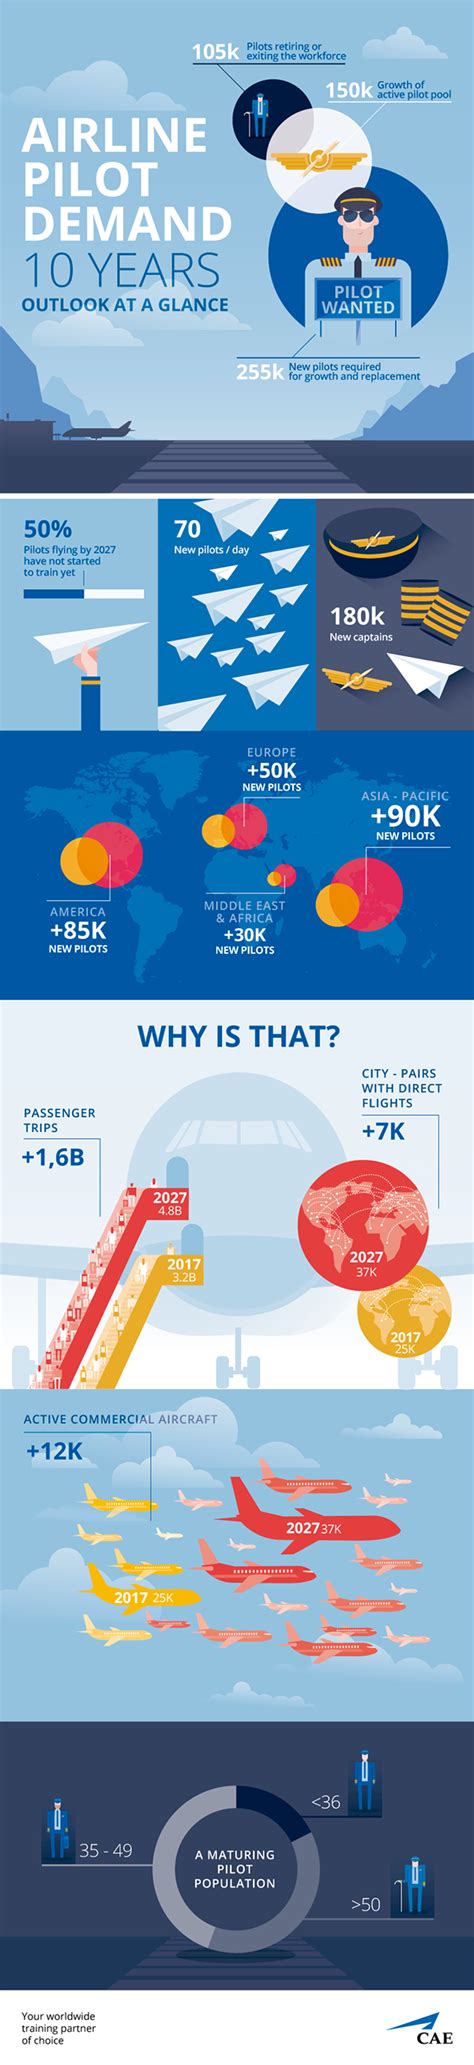 Airline Pilot Demand Infographic On Behance